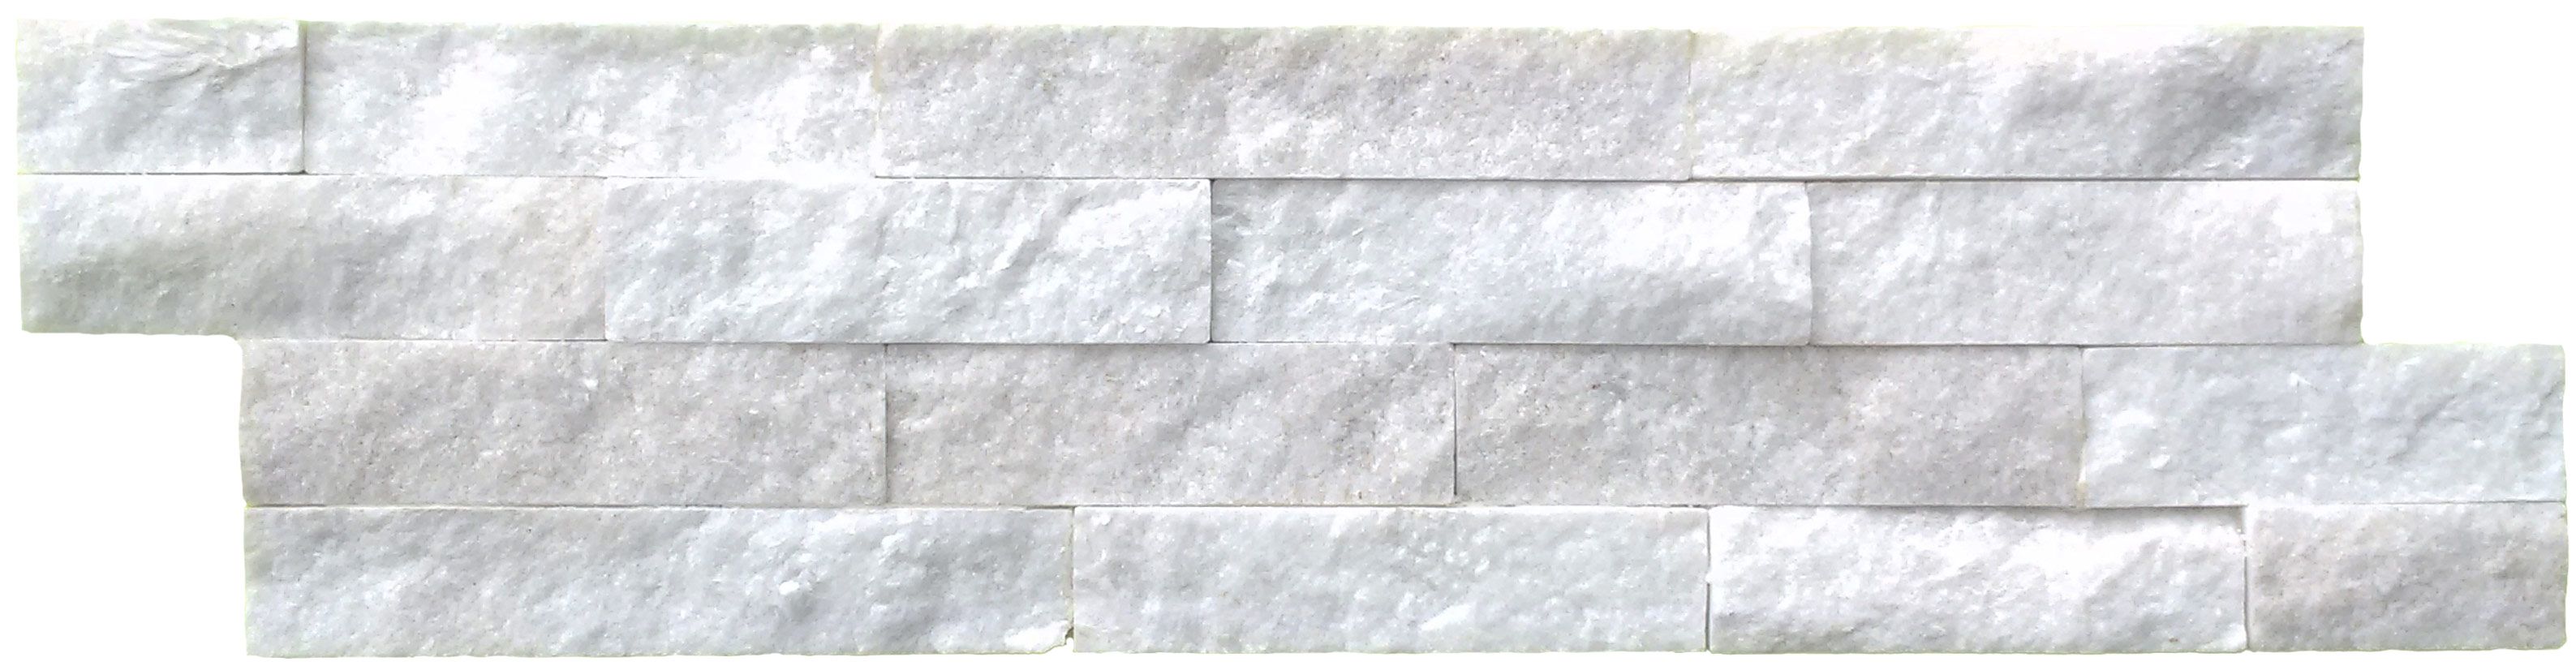 White Marble Split Face Mosaic - Click to Buy